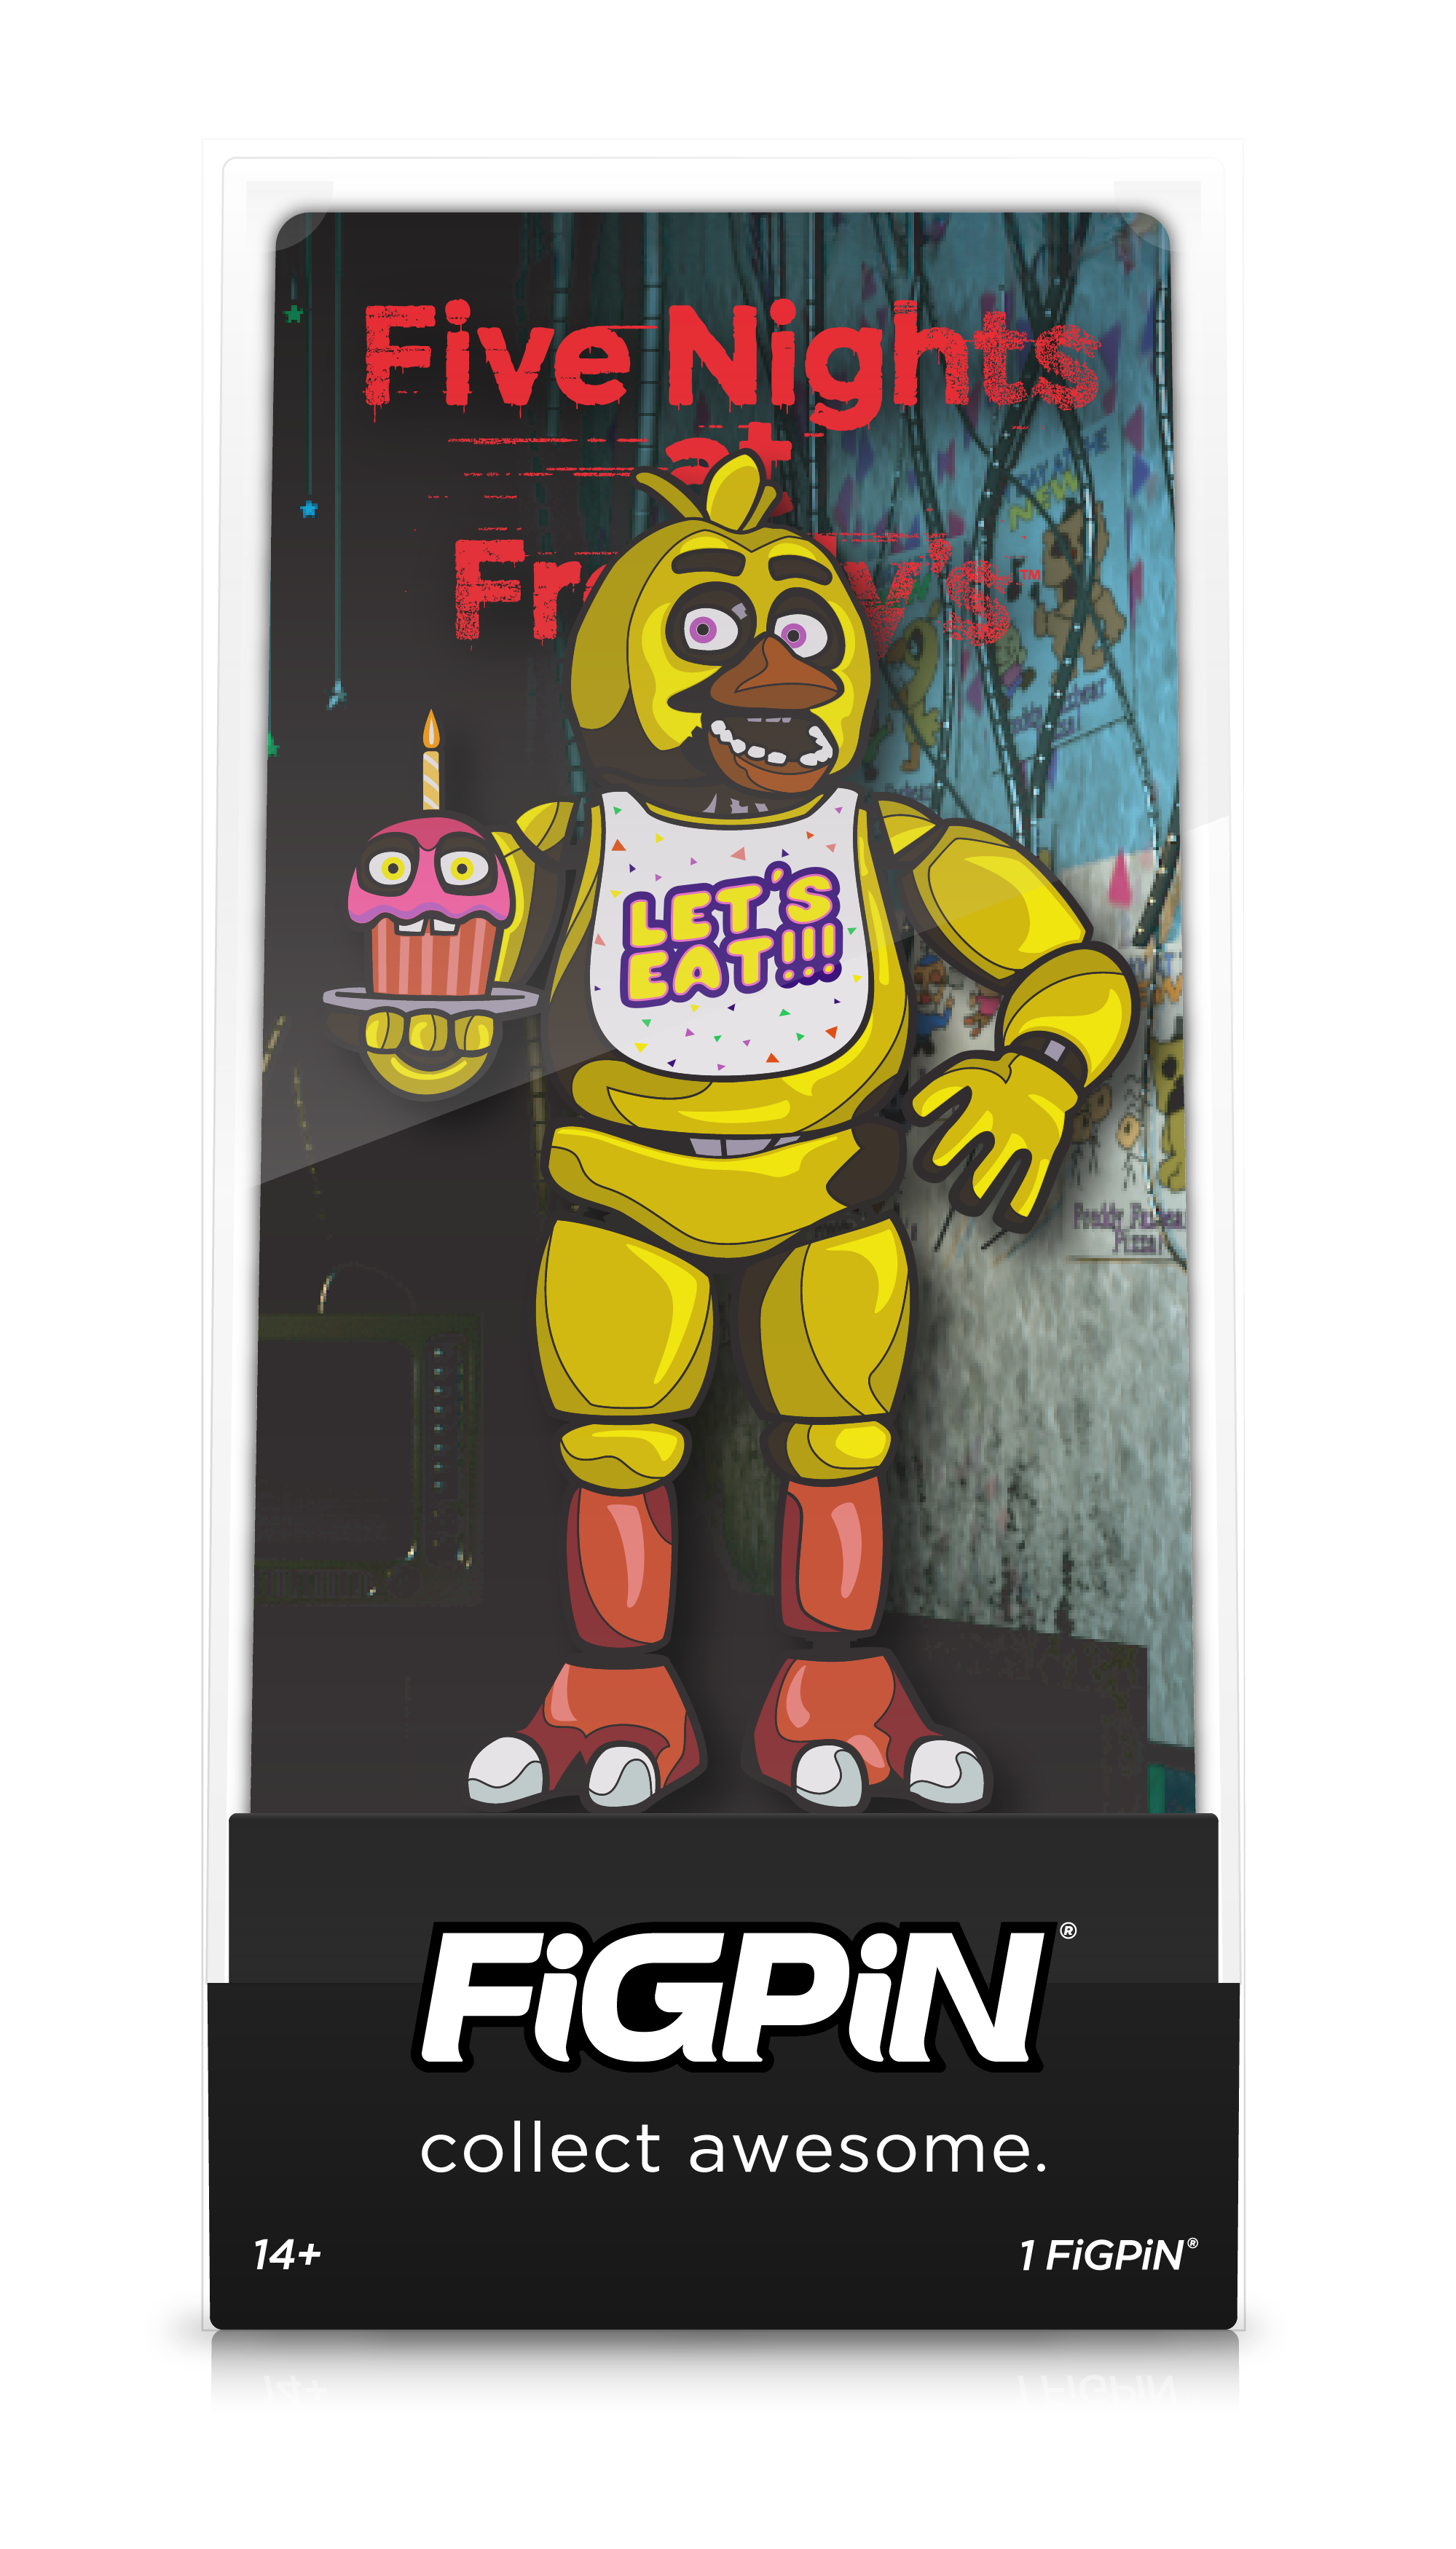 Front view of  Five Nights at Freddy's Chica enamel pin inside FiGPiN Display case reading “collect awesome"